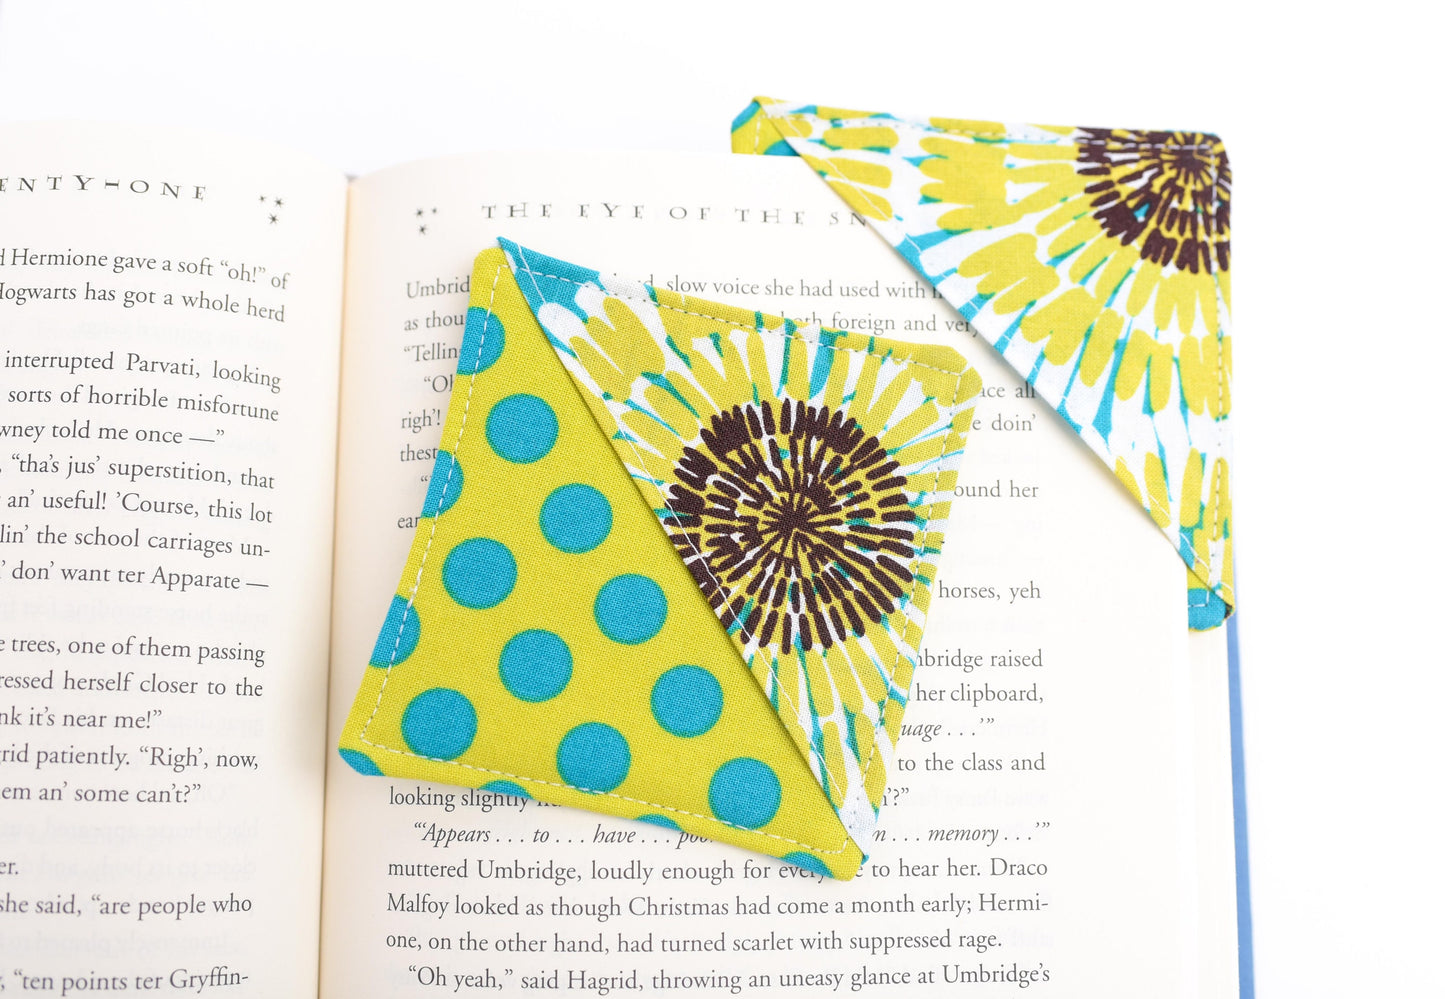 Lime and Turquoise Floral and Polka Dot Handmade Cloth Corner Bookmark